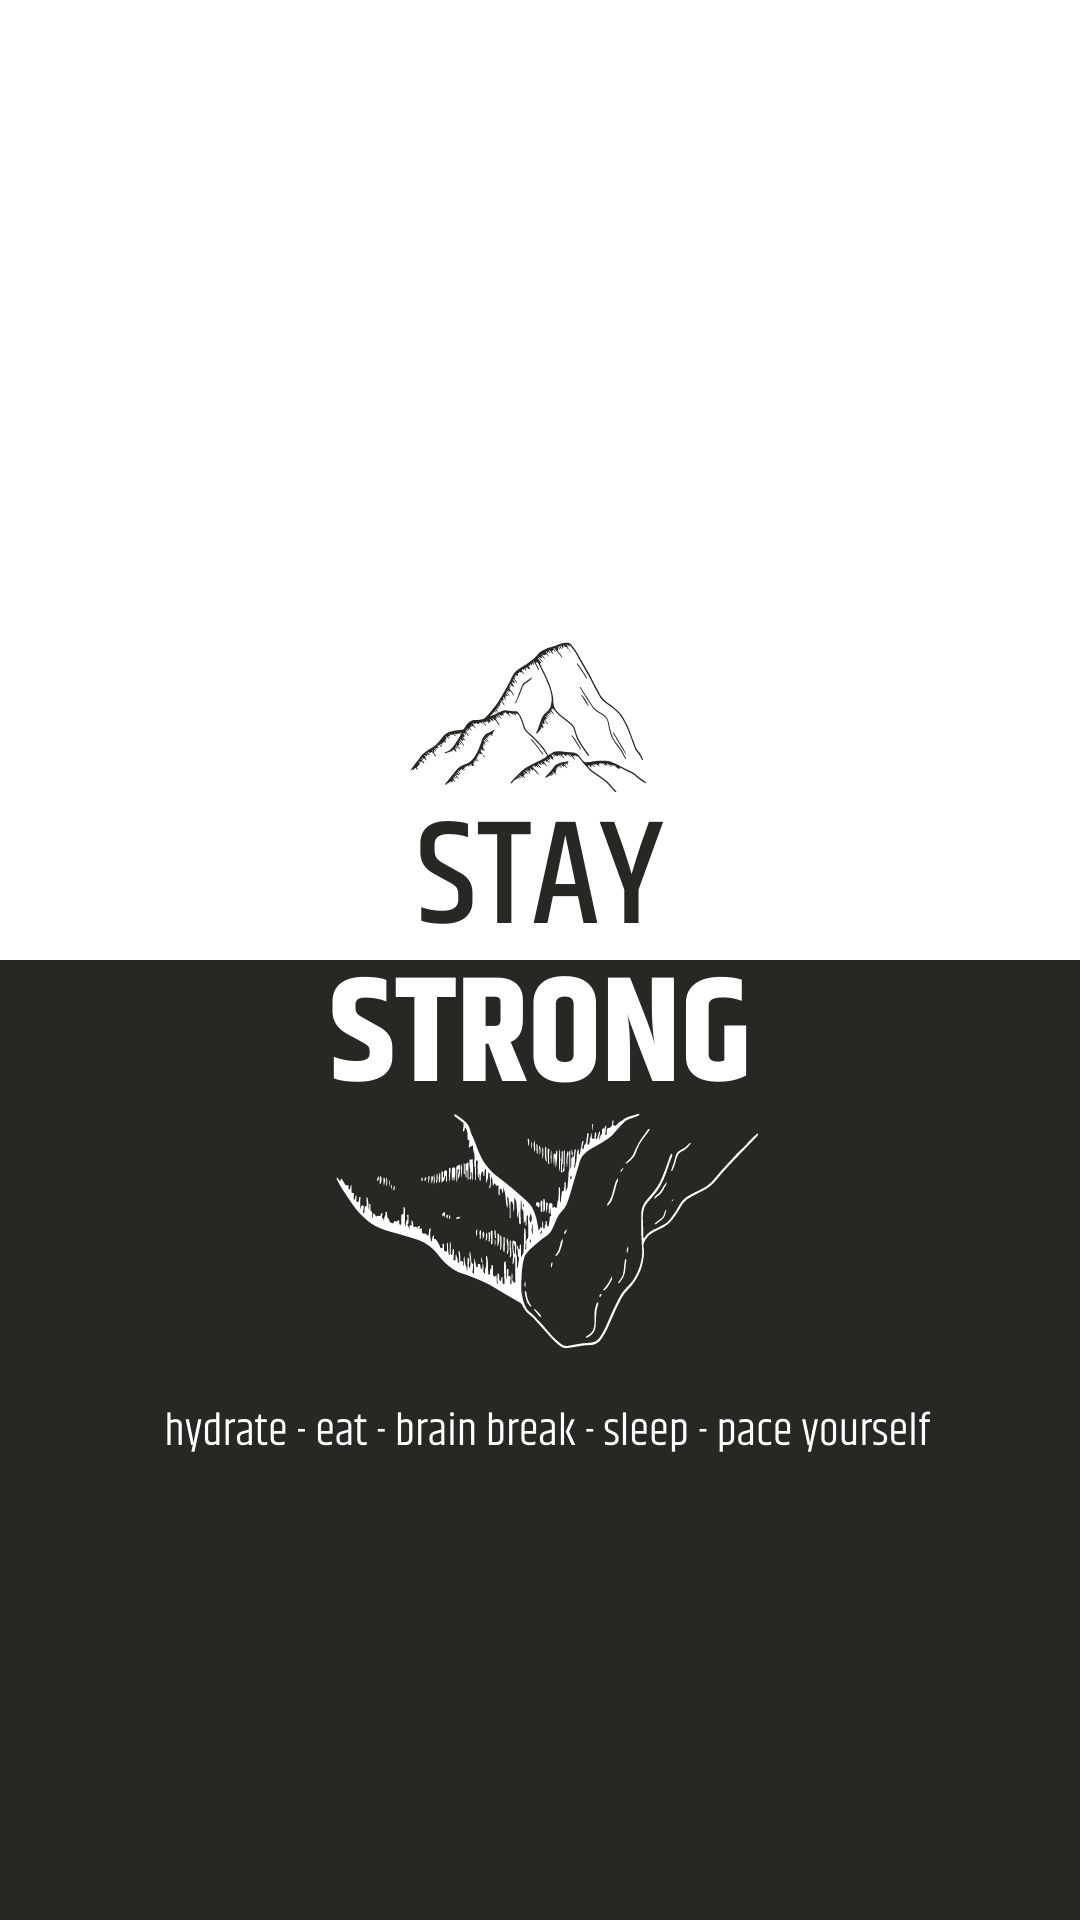 A black white image with an black outlined, upward facing mountain against a white backdrop and a white, downward facing mountain  against a black drop. Between the two mountains is text that reads Stay Strong. Below the mountains are the tips hydrate, eat, brain break, sleep, pace yourself.